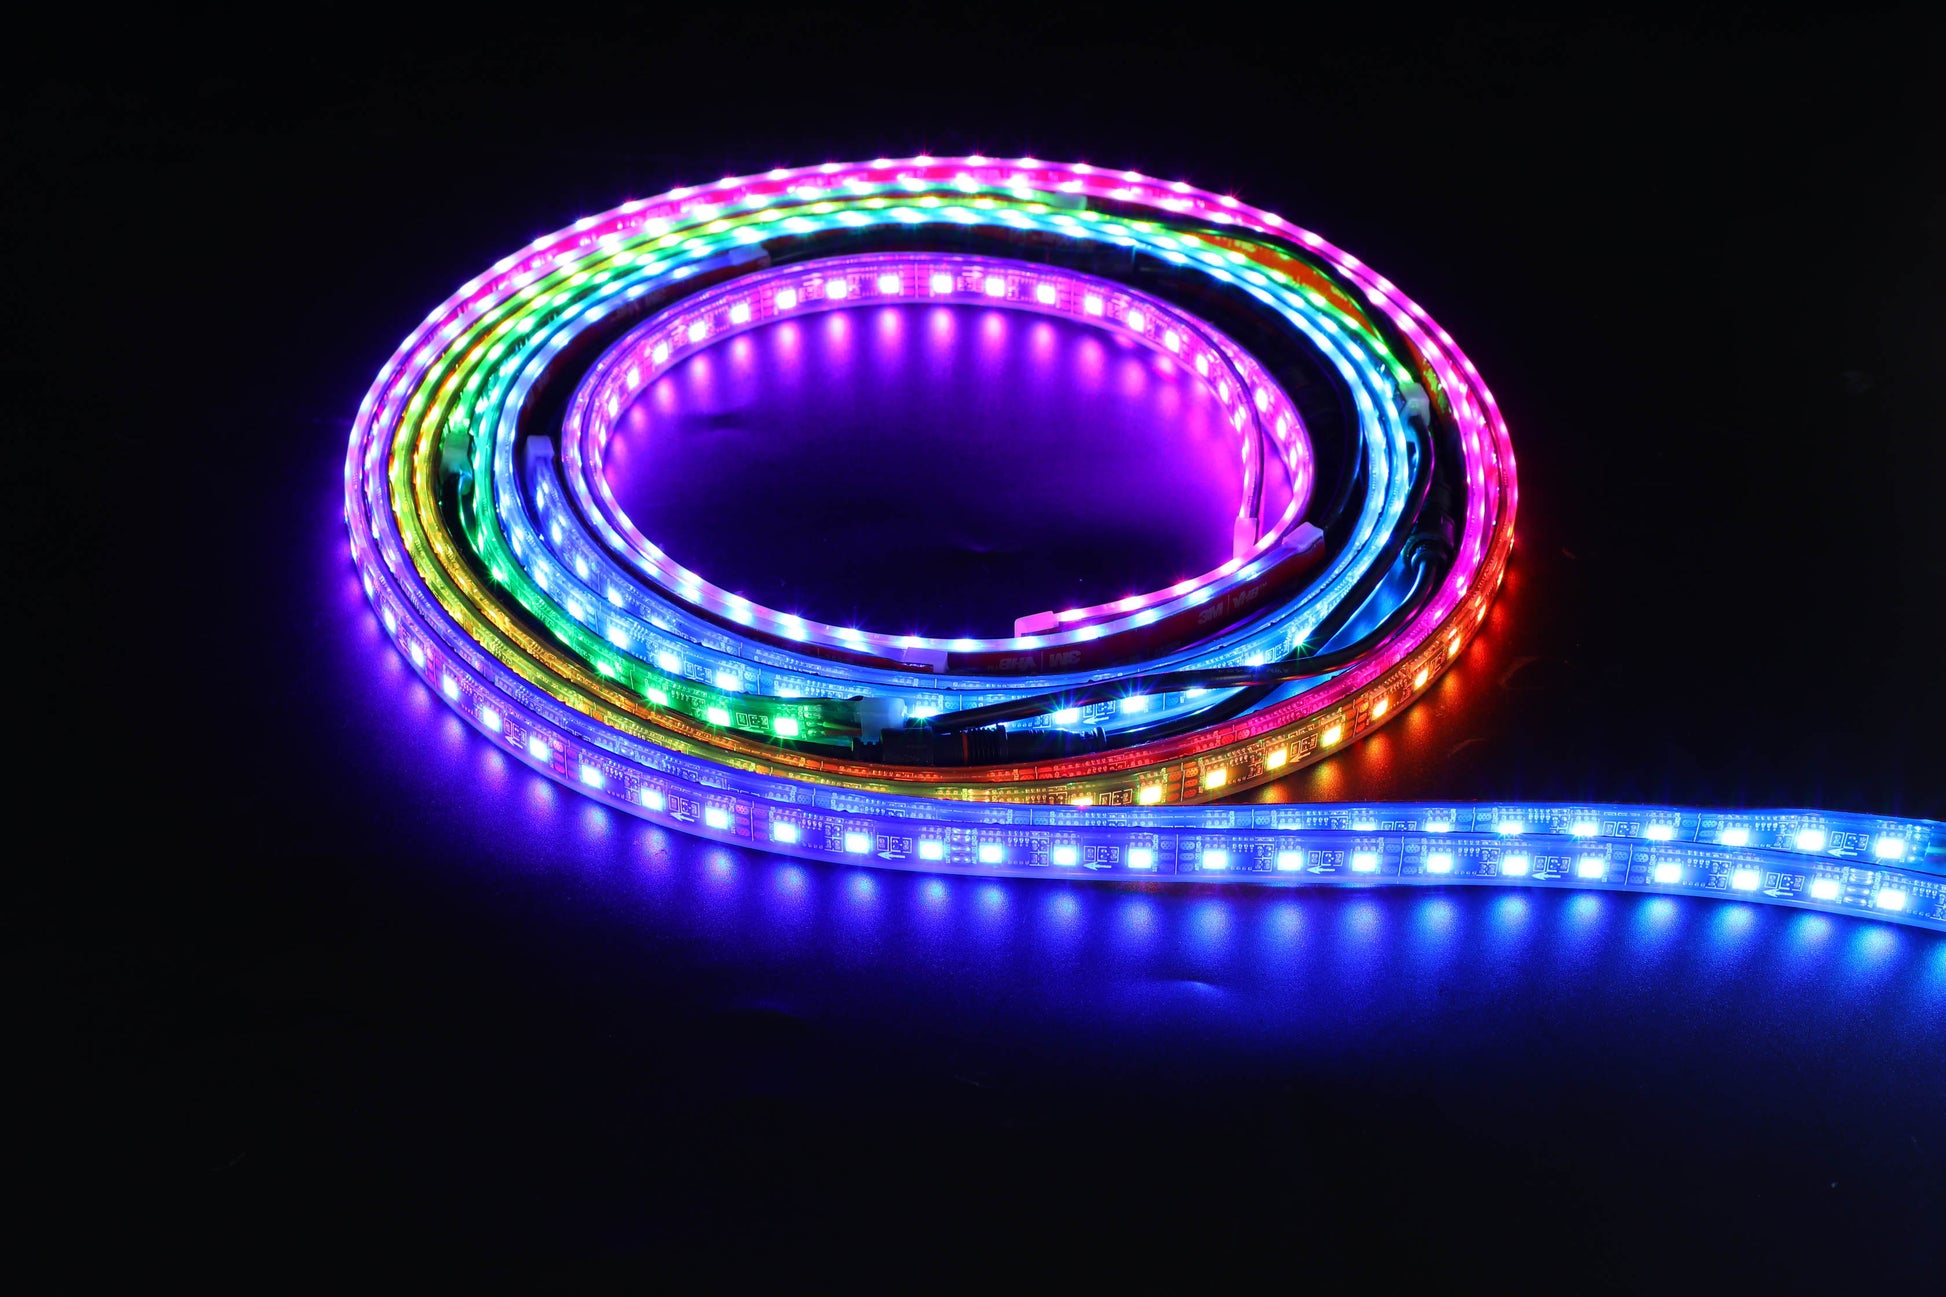 a close up of an Underglow light strip on a black background